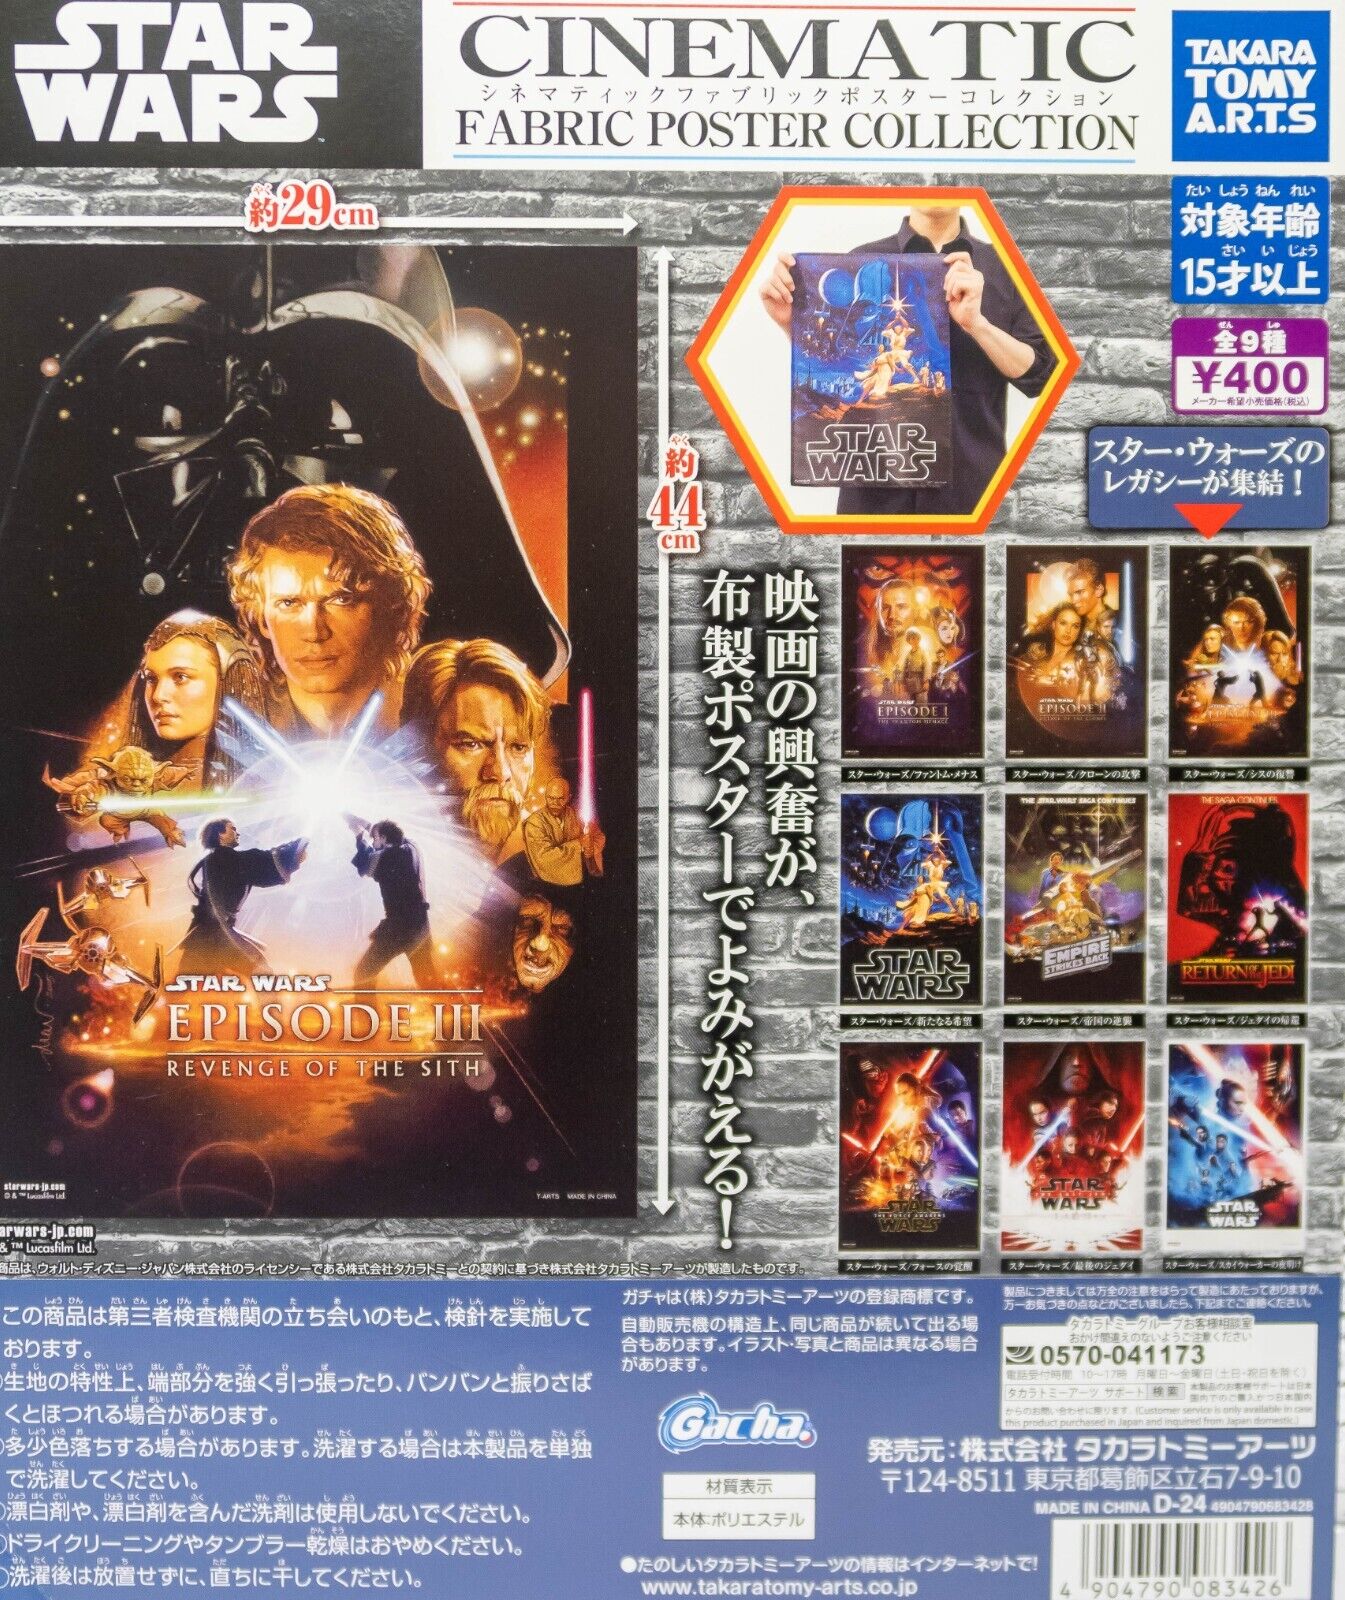 Takara Tomy Star Wars Cinmeatic Fabric Poster Collection Capsule Toy Set of 9